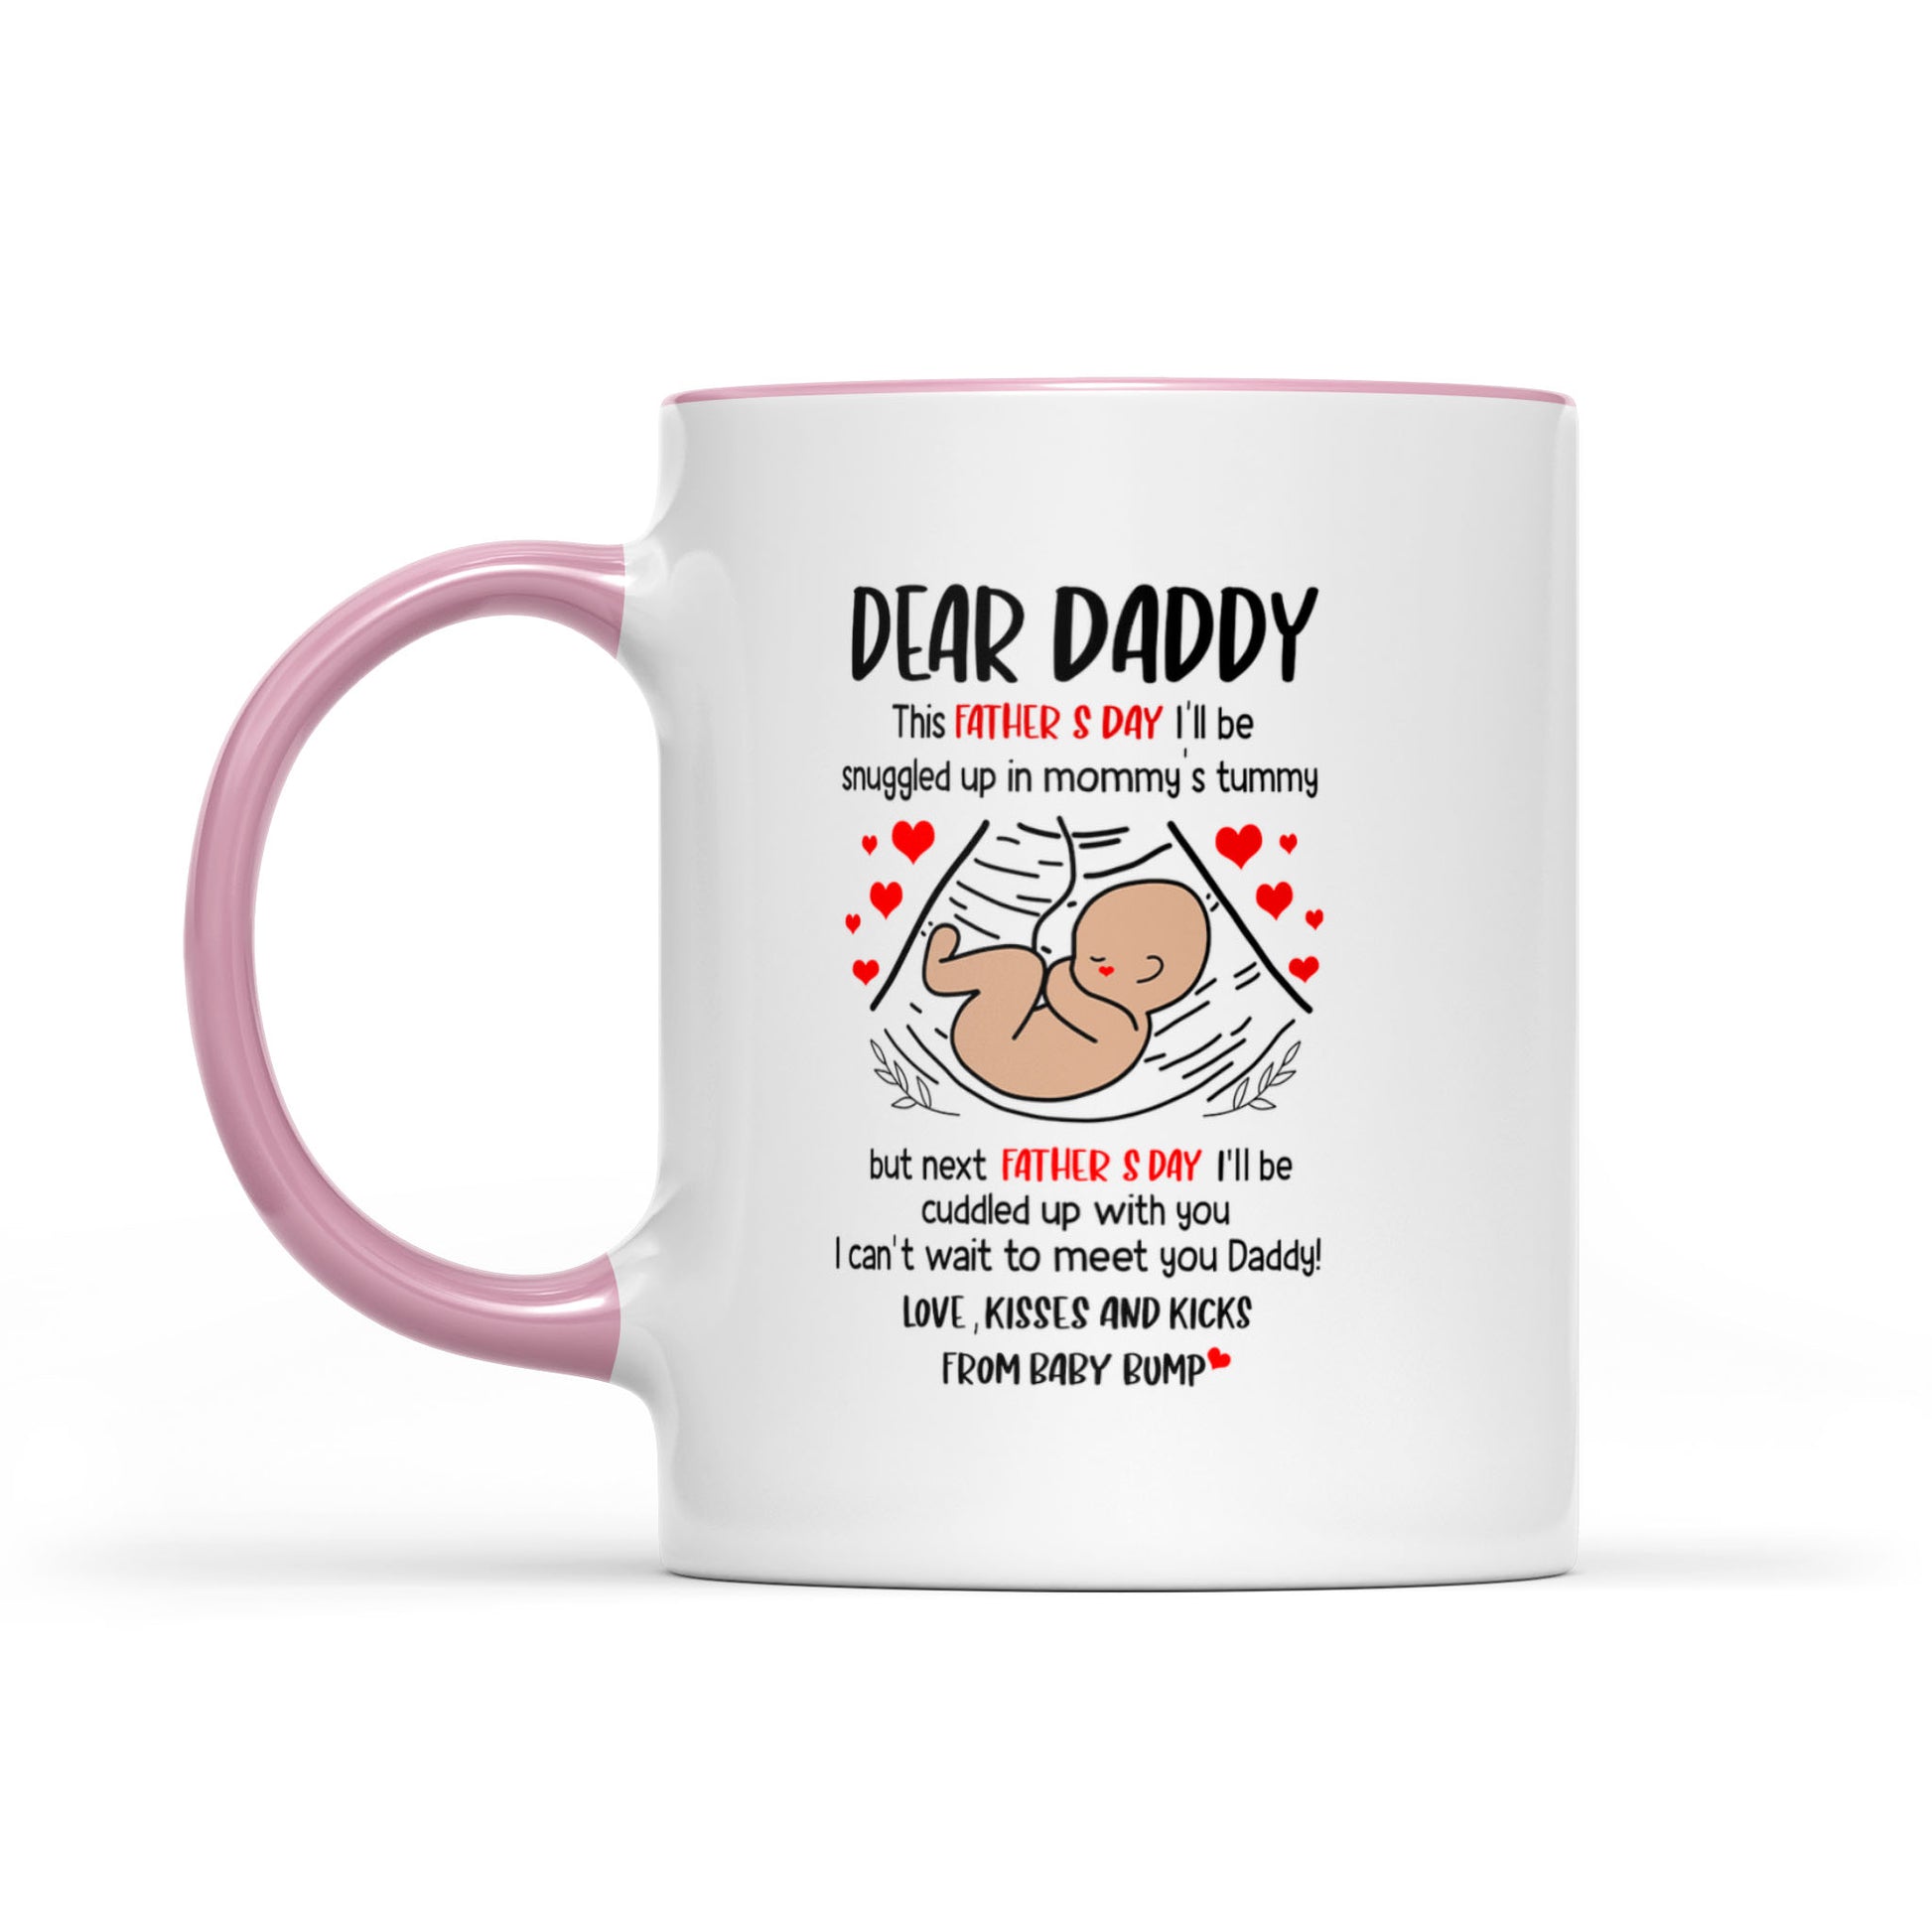 Daddysaurus Fathers Day Gift New Dad Pregnancy Announcement